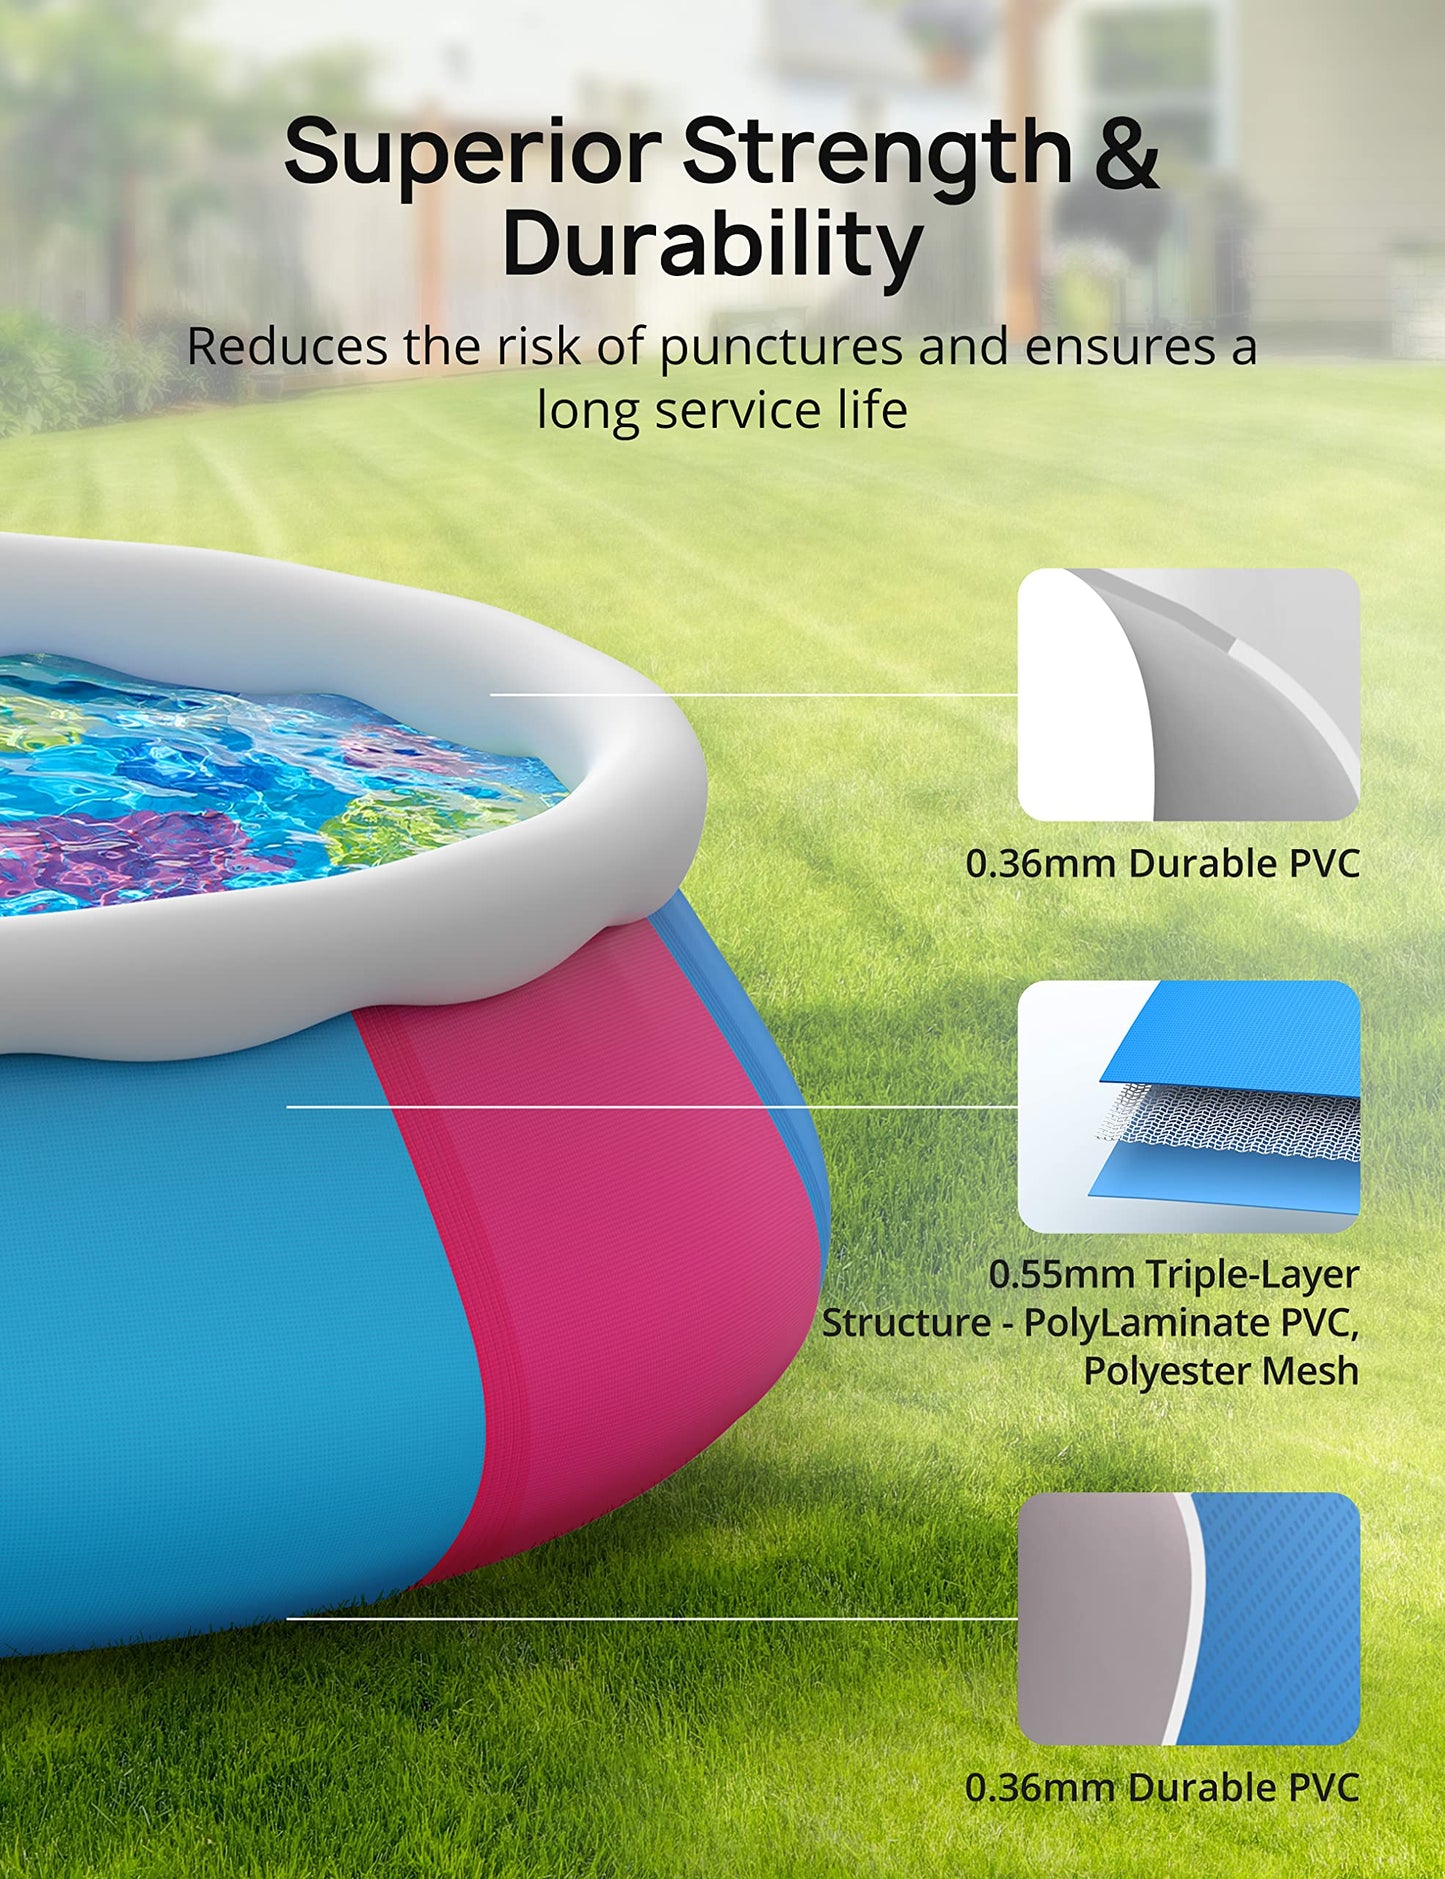 Inflatable Swimming Pool, EVAJOY 10ft ×30in Easy Set Pool with Pool Cover, Blow Up Pool Swimming Pools Above Ground for Kids Adults Family Backyard Garden 10ft*30in